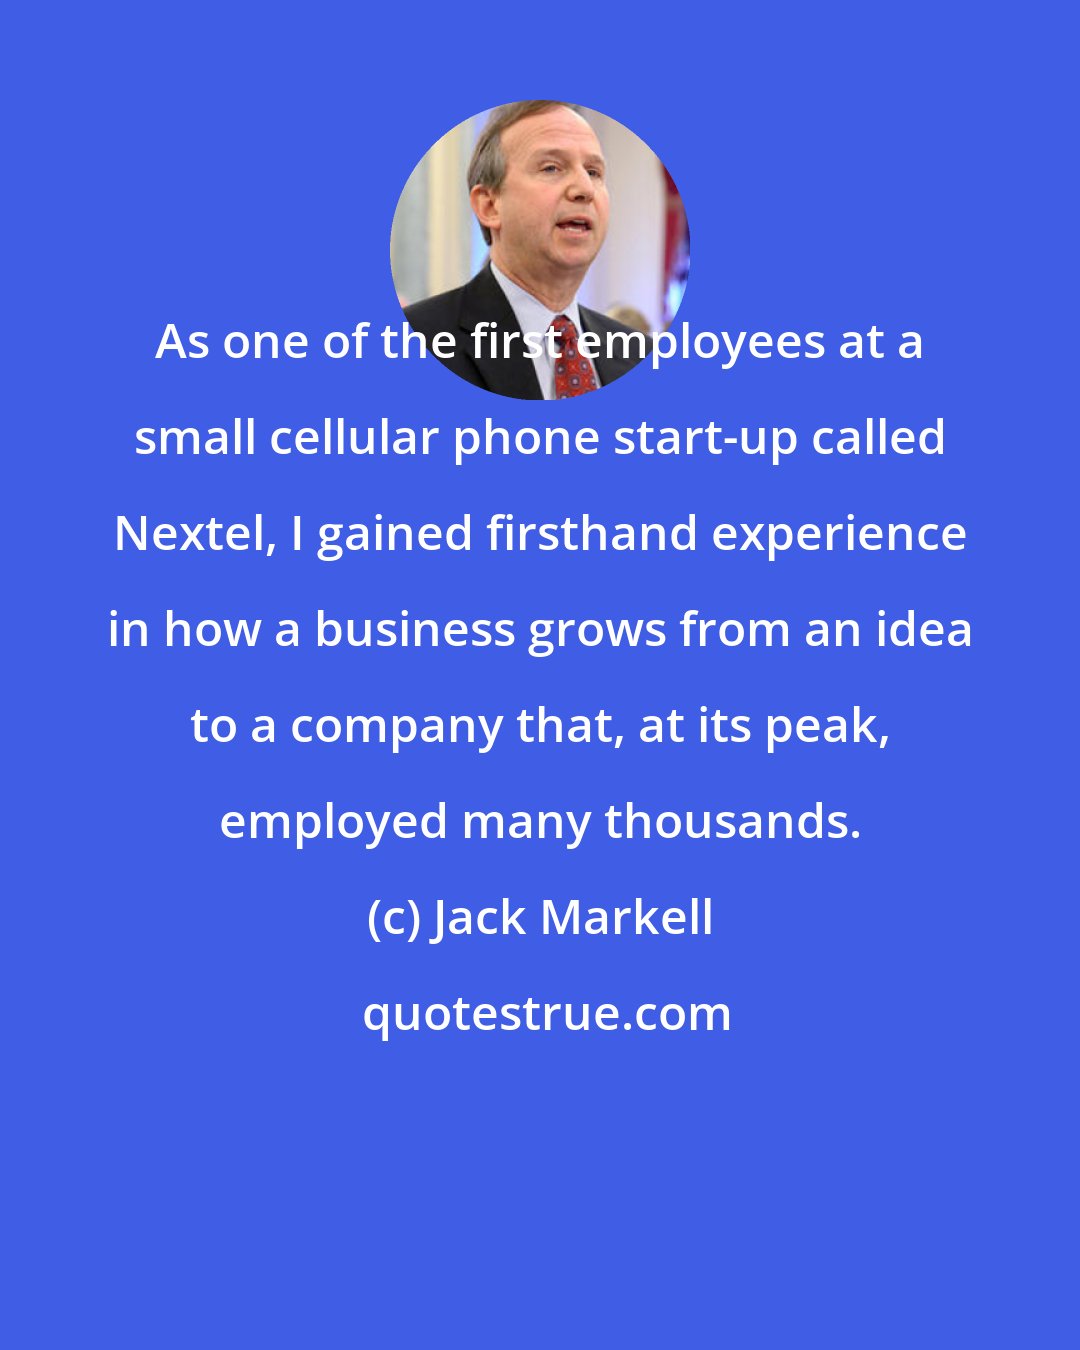 Jack Markell: As one of the first employees at a small cellular phone start-up called Nextel, I gained firsthand experience in how a business grows from an idea to a company that, at its peak, employed many thousands.